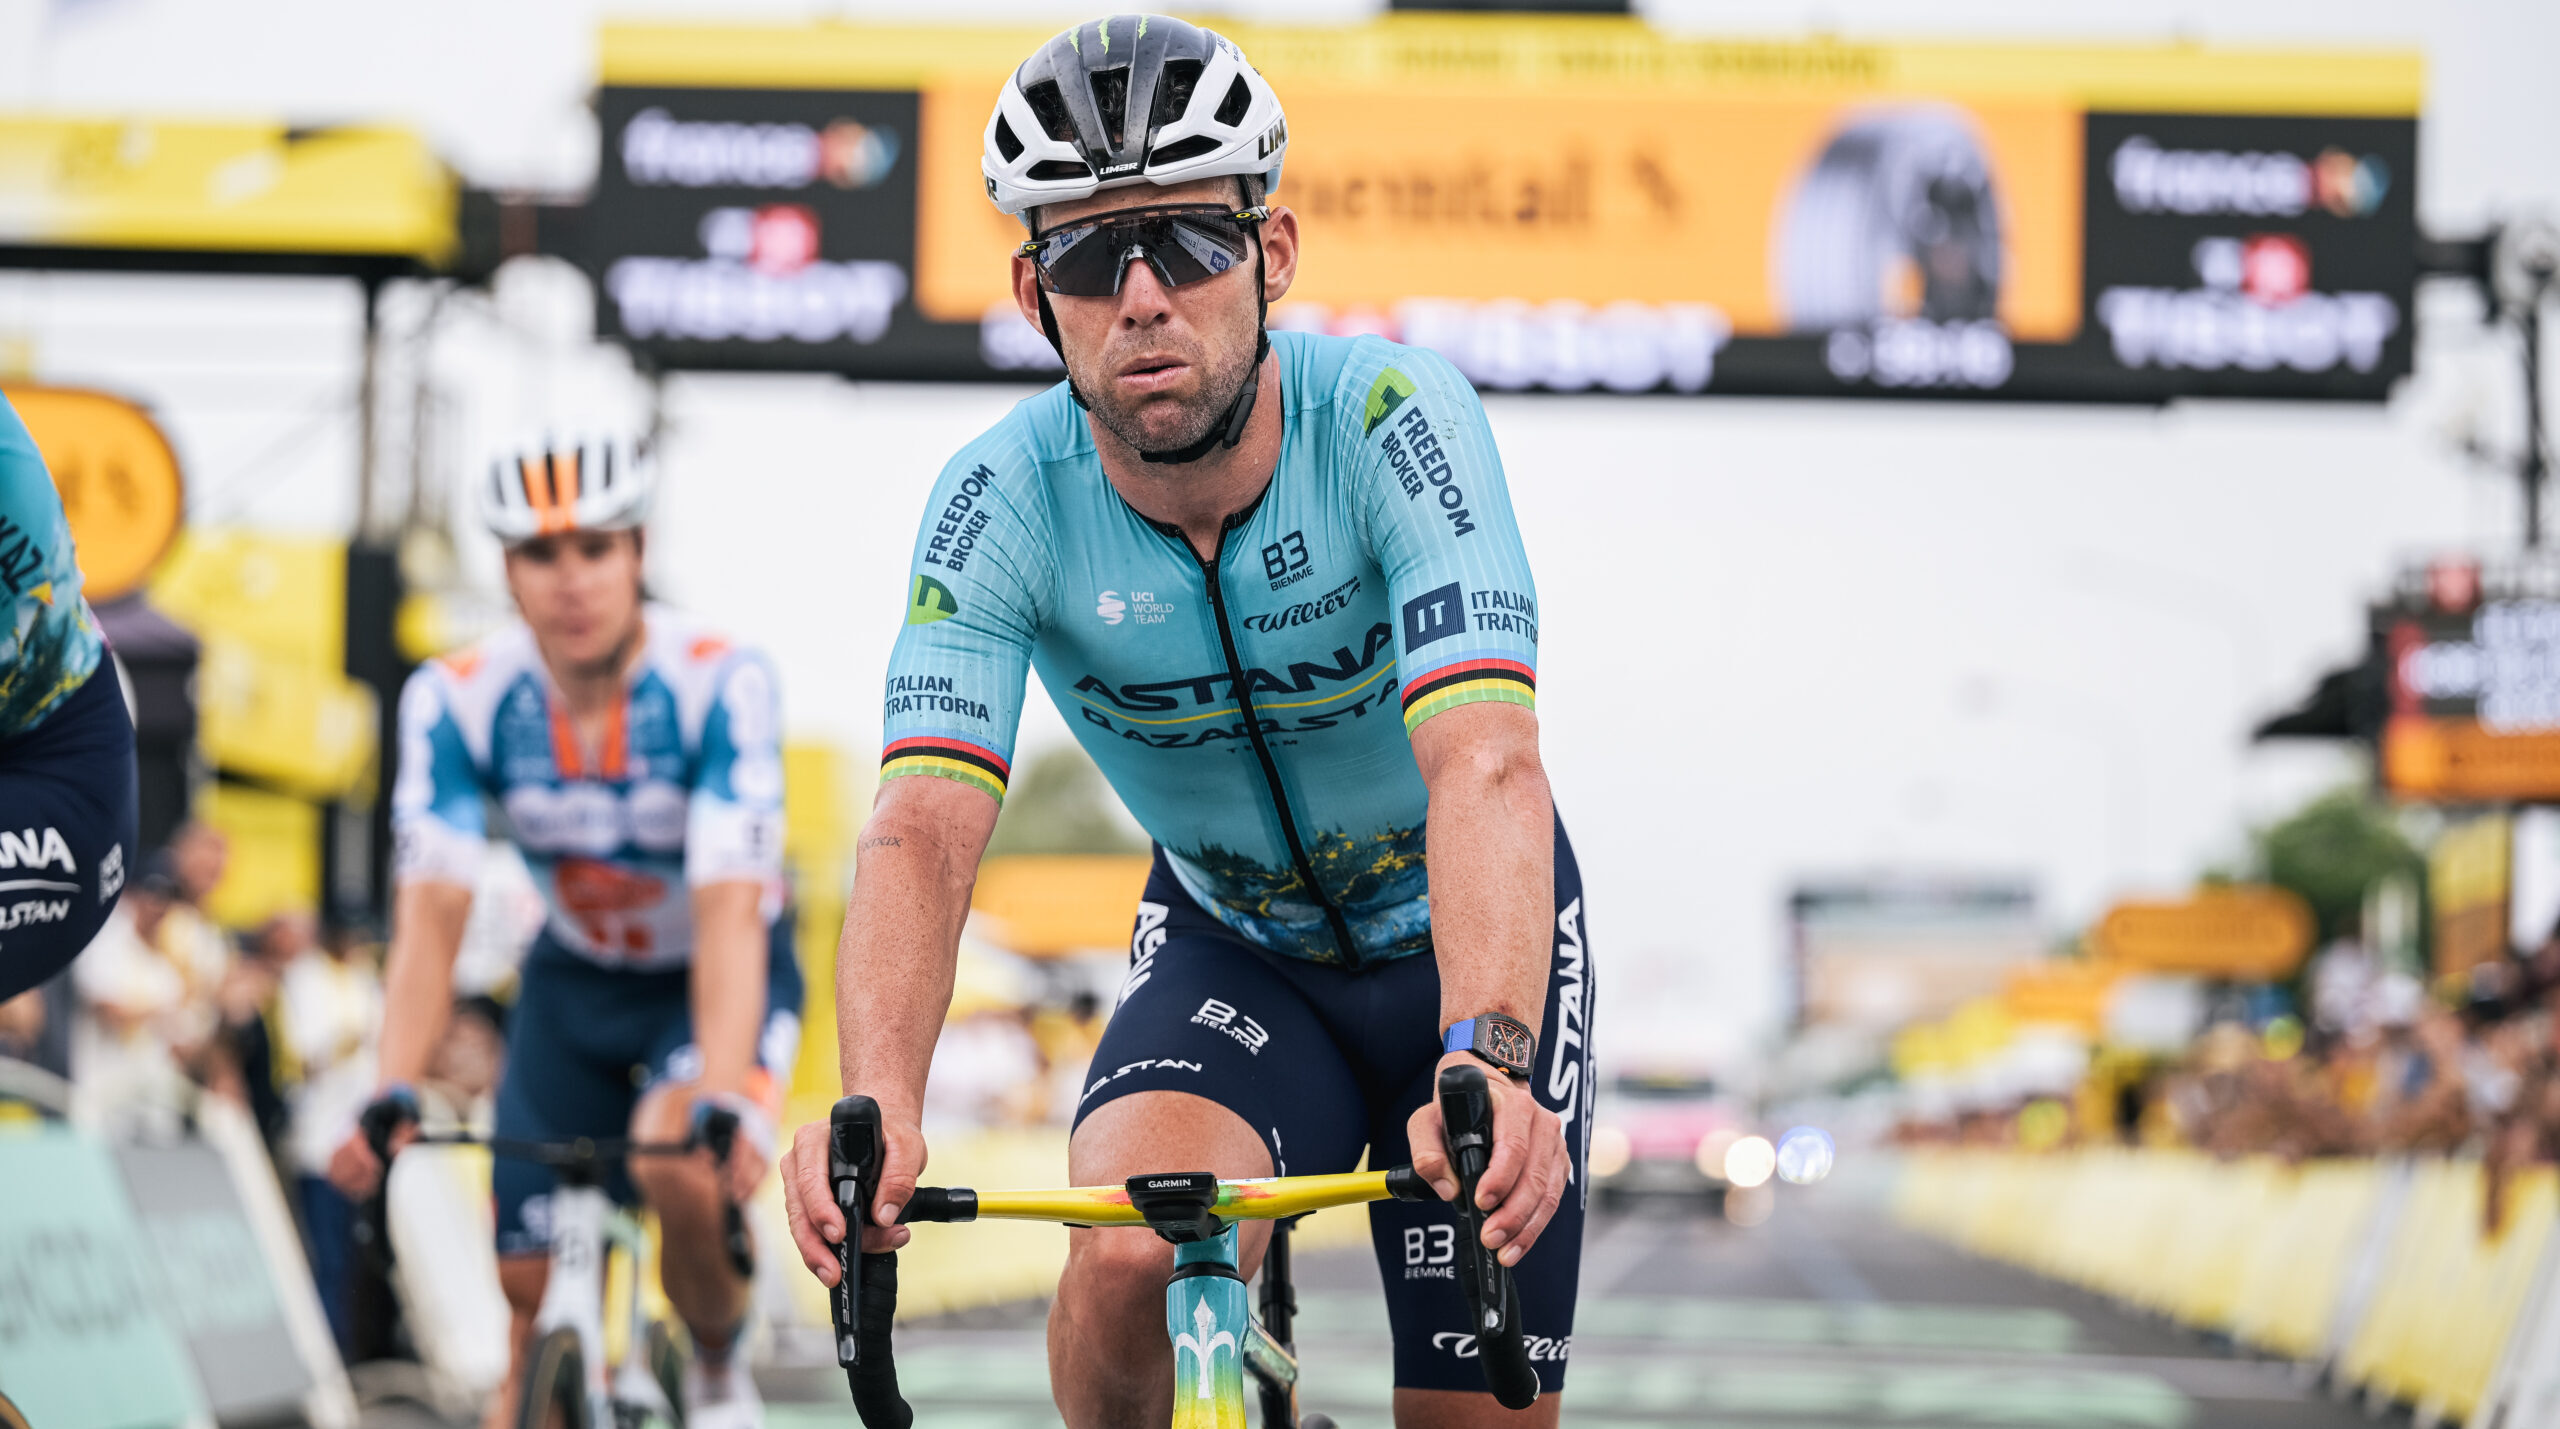 Mark Cavendish | “If you’ve got my body type, don’t start cycling, those days are gone”